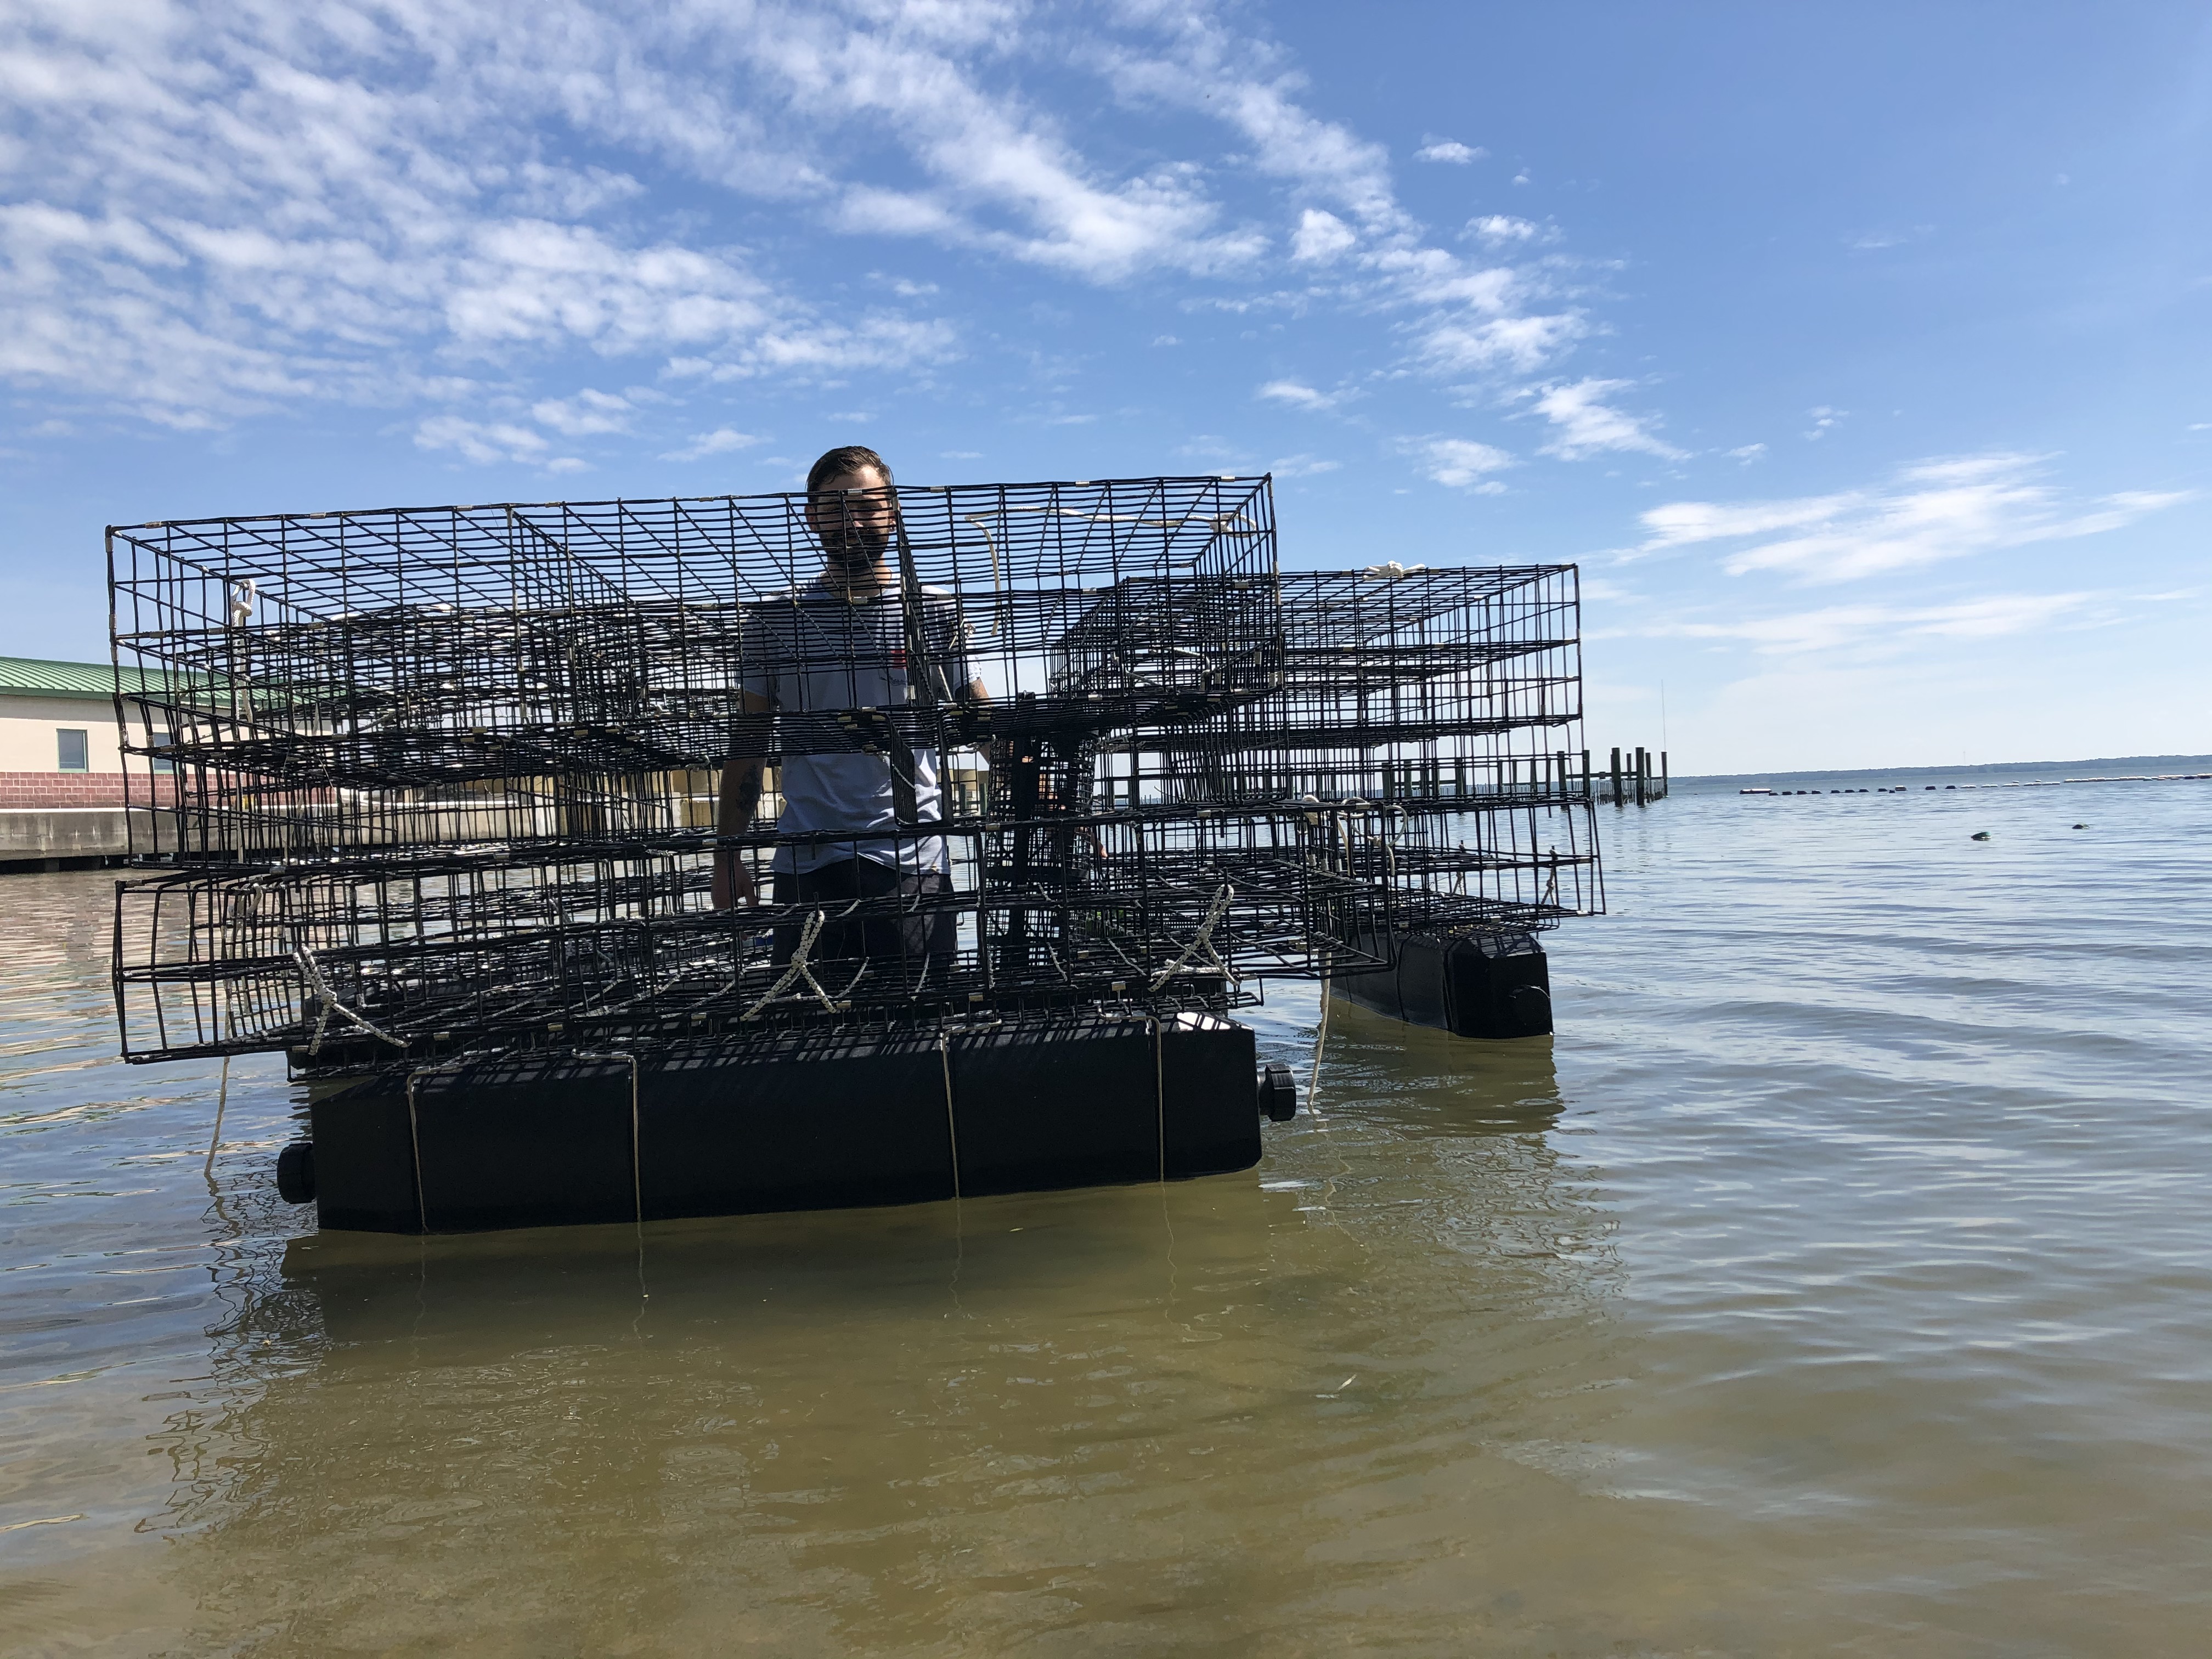 Researchers like me, pictured, are actively working with Maryland oyster growers to better understand how to best use aquaculture gear to promote more efficient production.